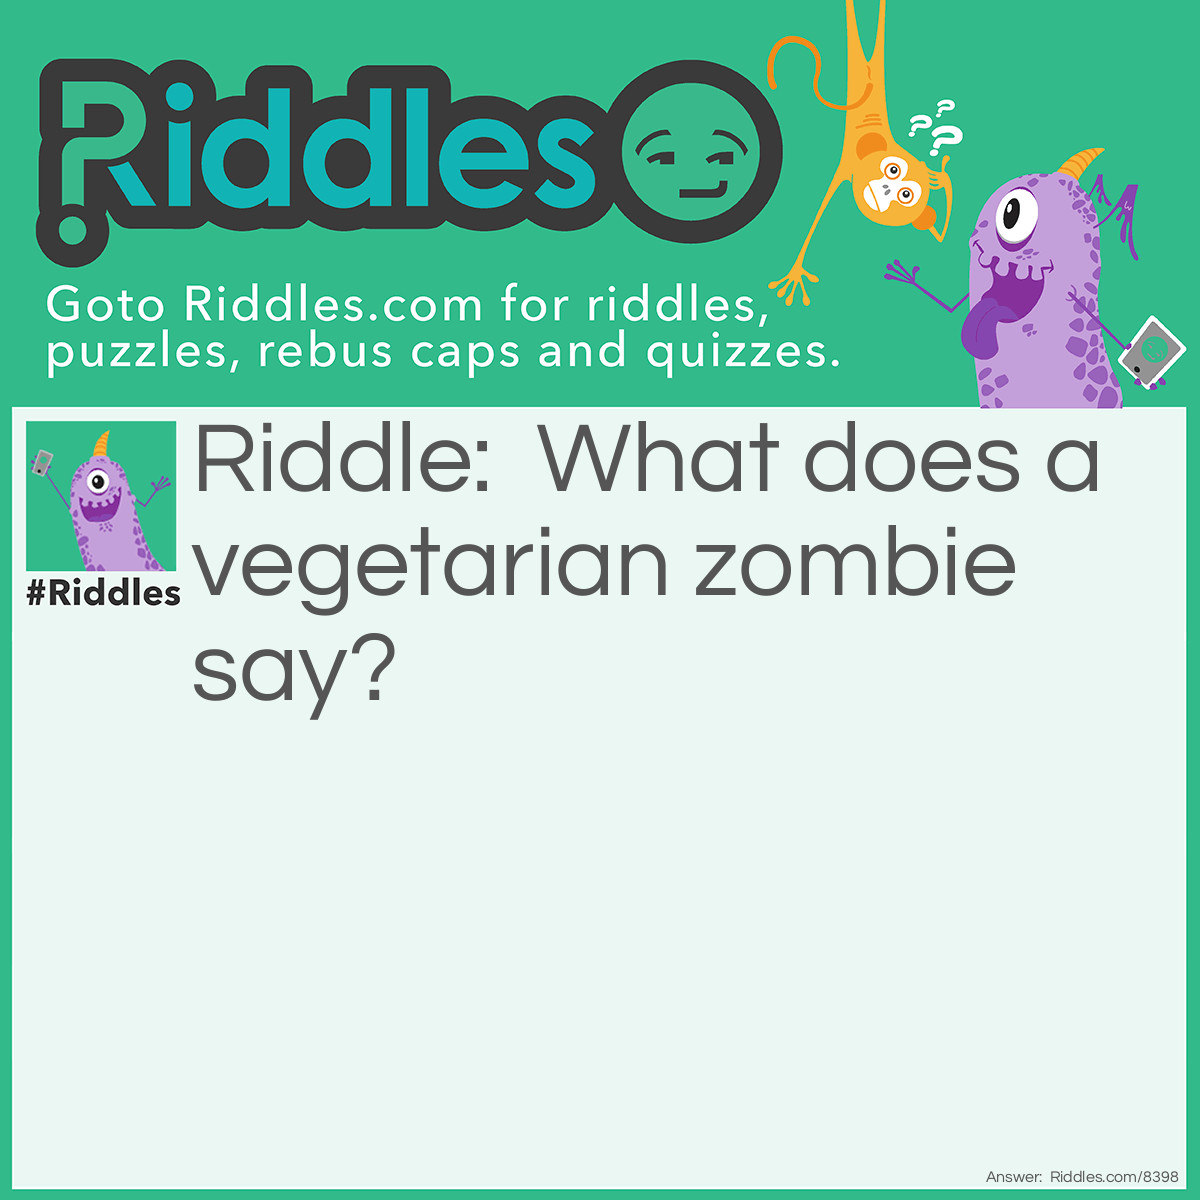 Riddle: What does a vegetarian zombie say? Answer: 'G'rainsss!